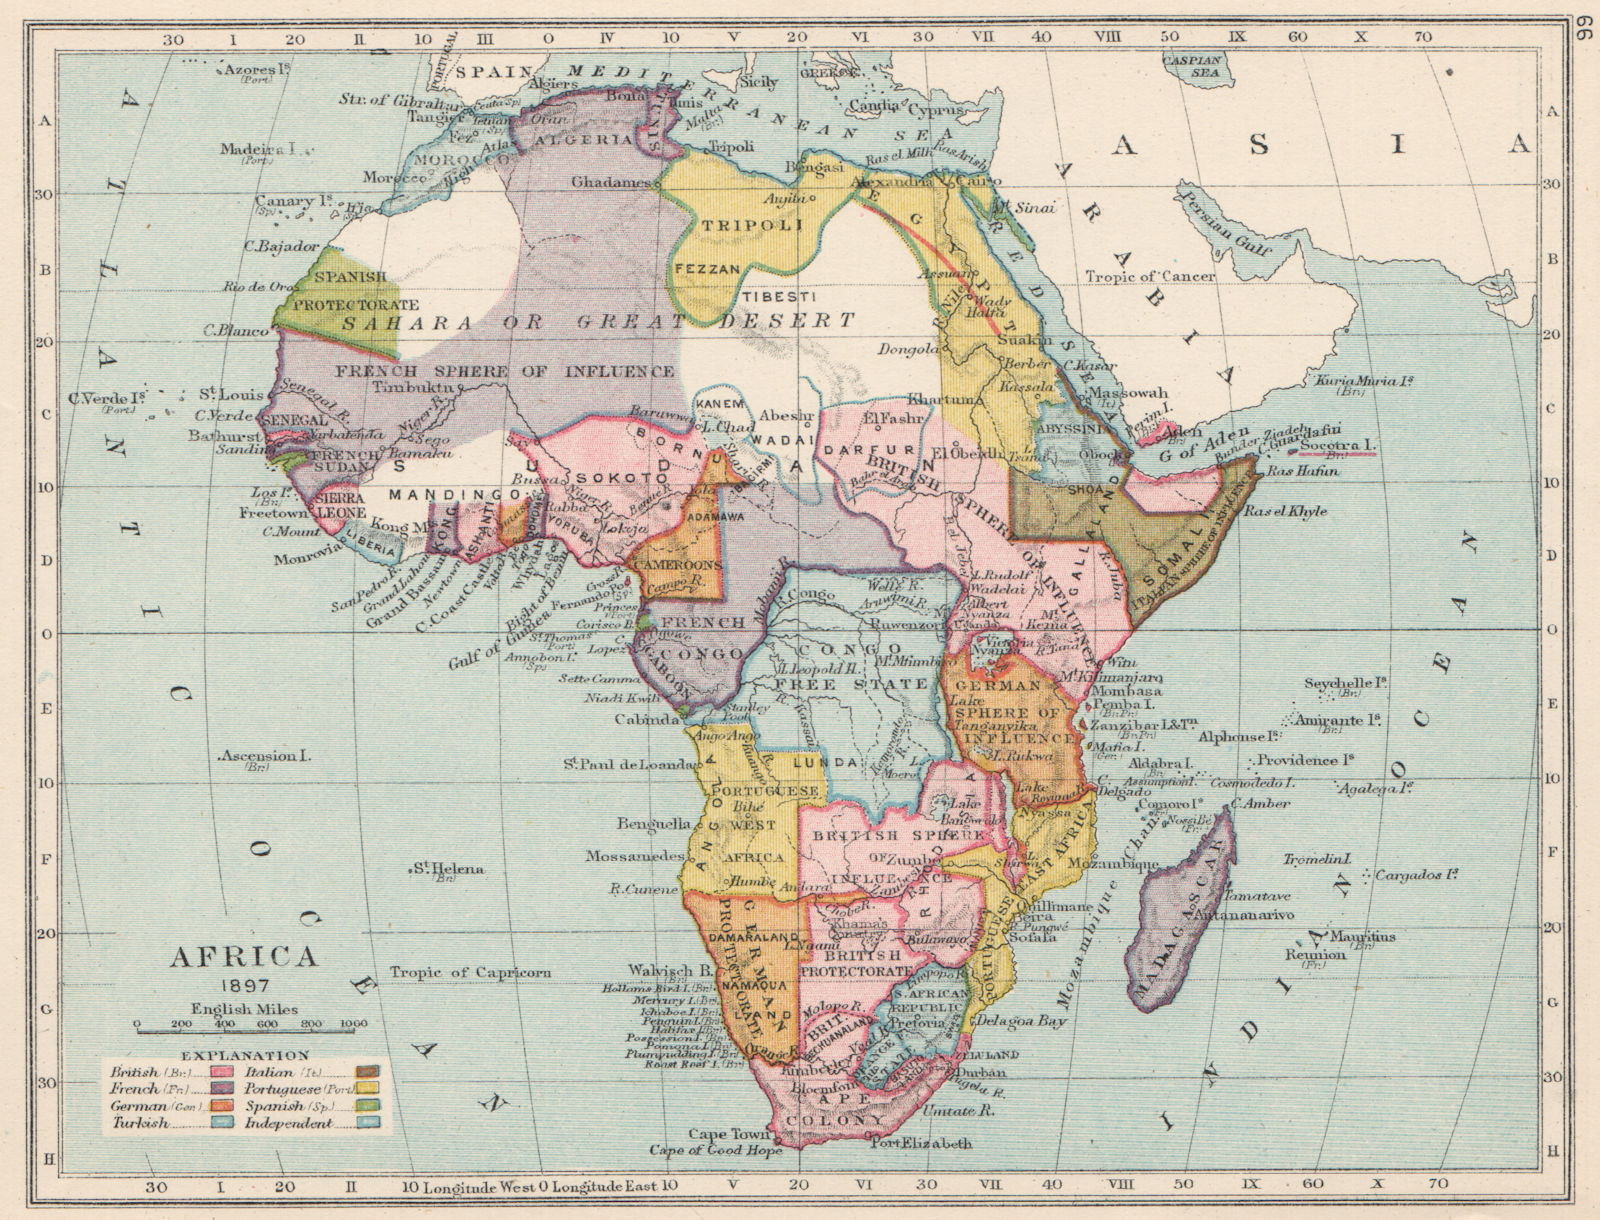 COLONIAL AFRICA 1897. Showing colonies & spheres of influence 1907 old map